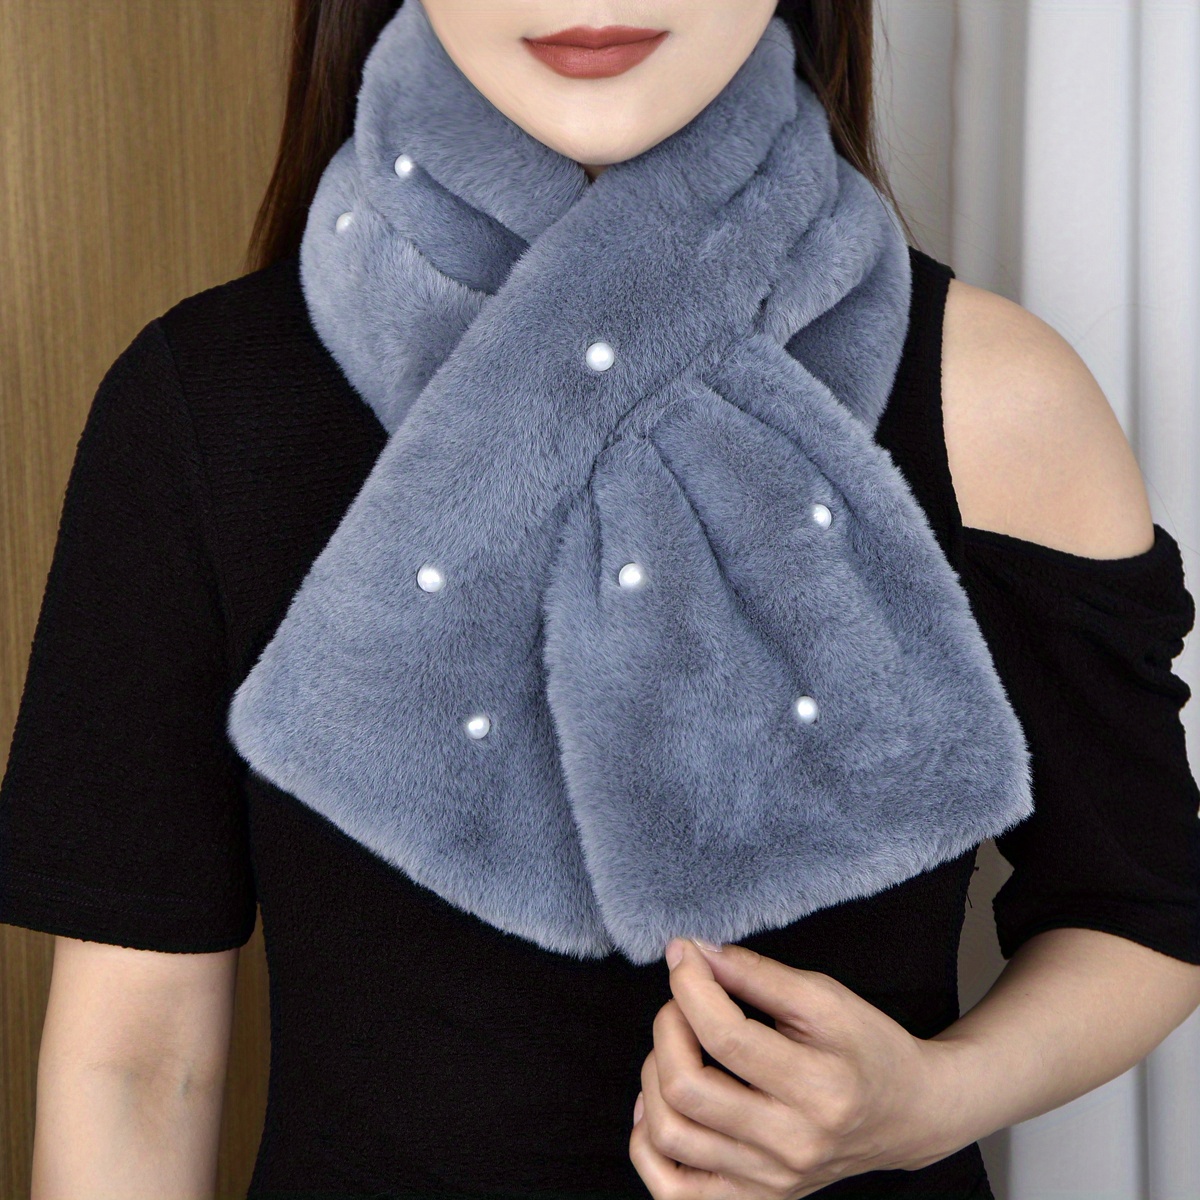 JAYLEY Grey Faux Fur Scarf with Pearl Detail Size: One Size Grey One Size JAYLEY